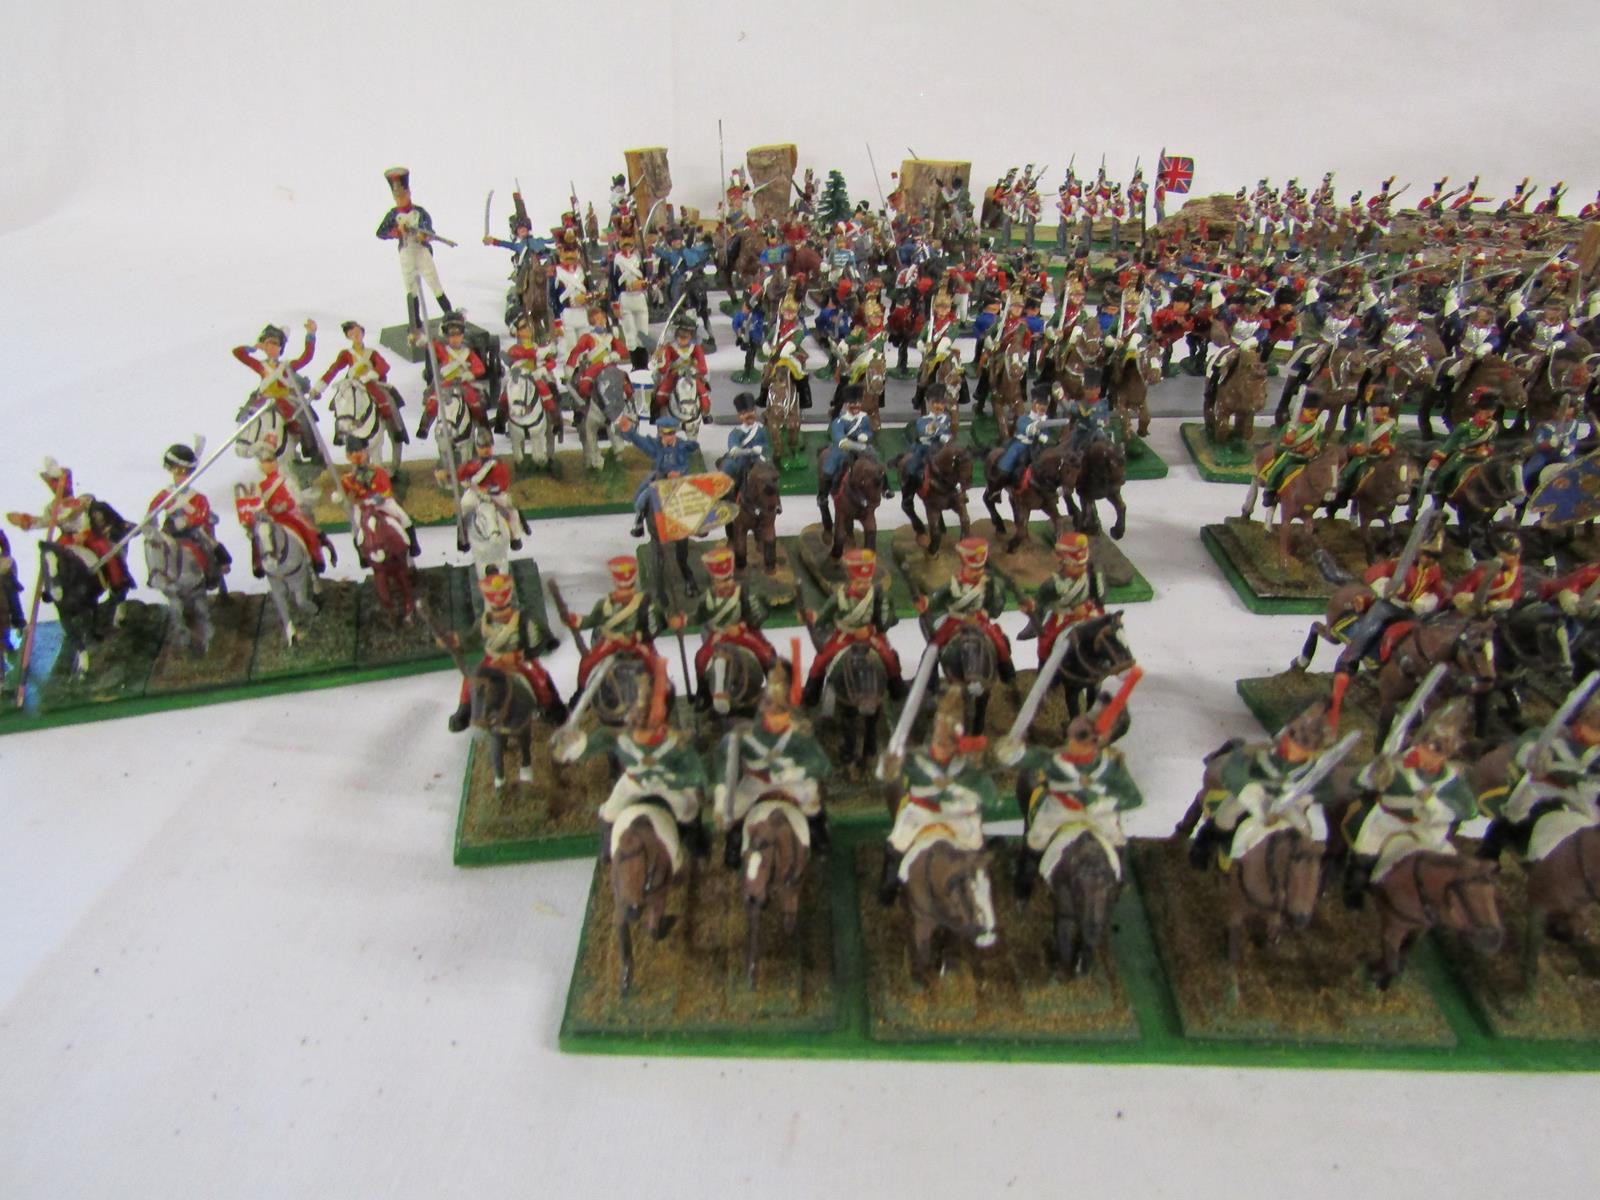 Collection of miniature military figures - some set in scenes - Image 5 of 6